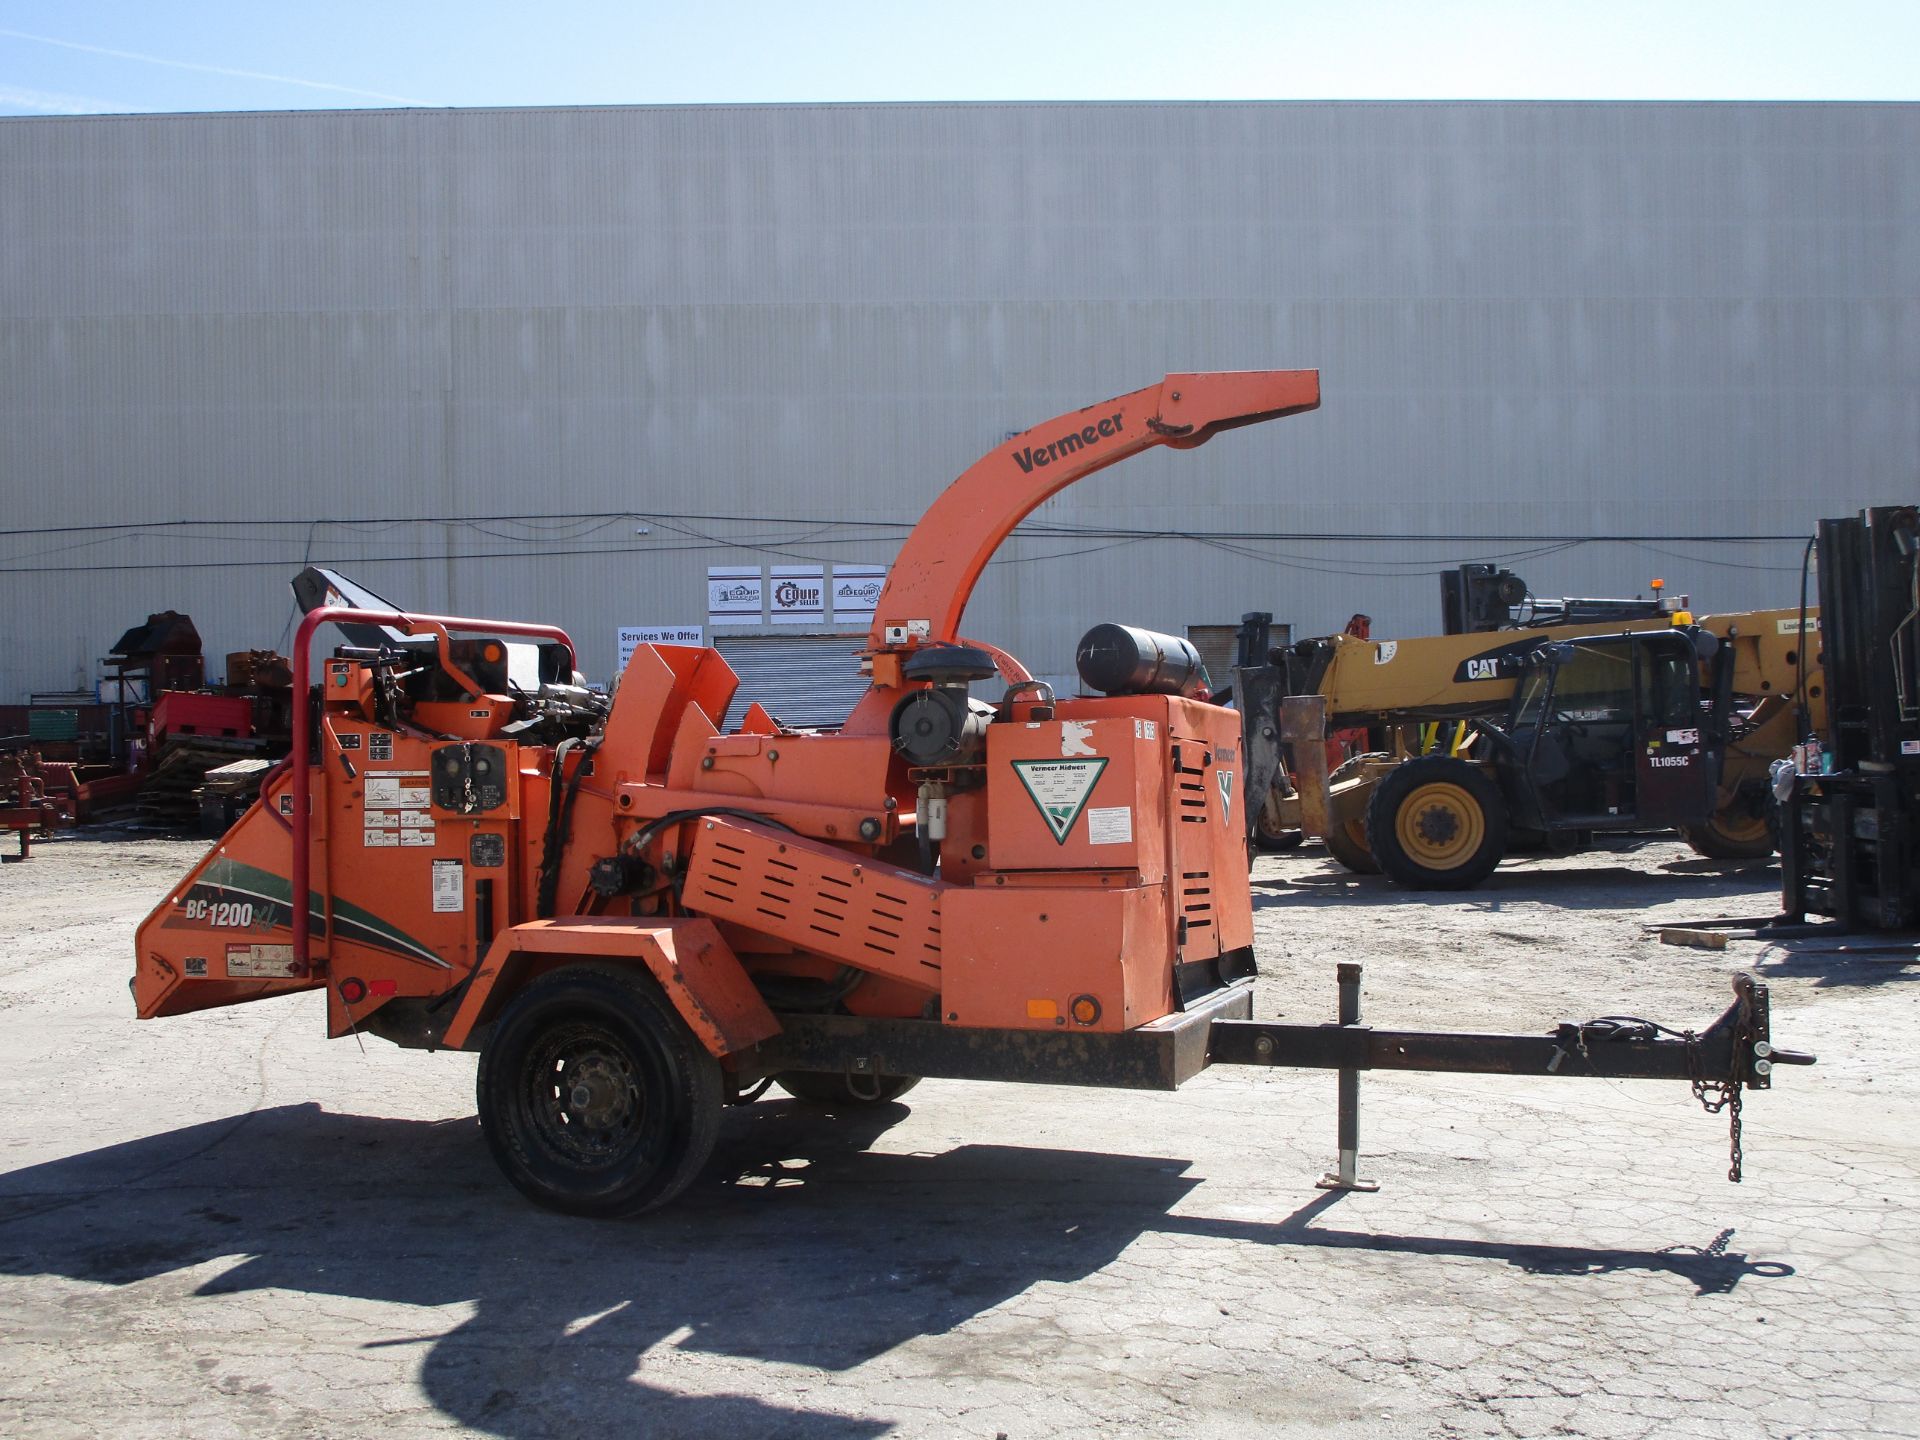 2012 Vermeer BC1200XL Chipper - Image 8 of 9